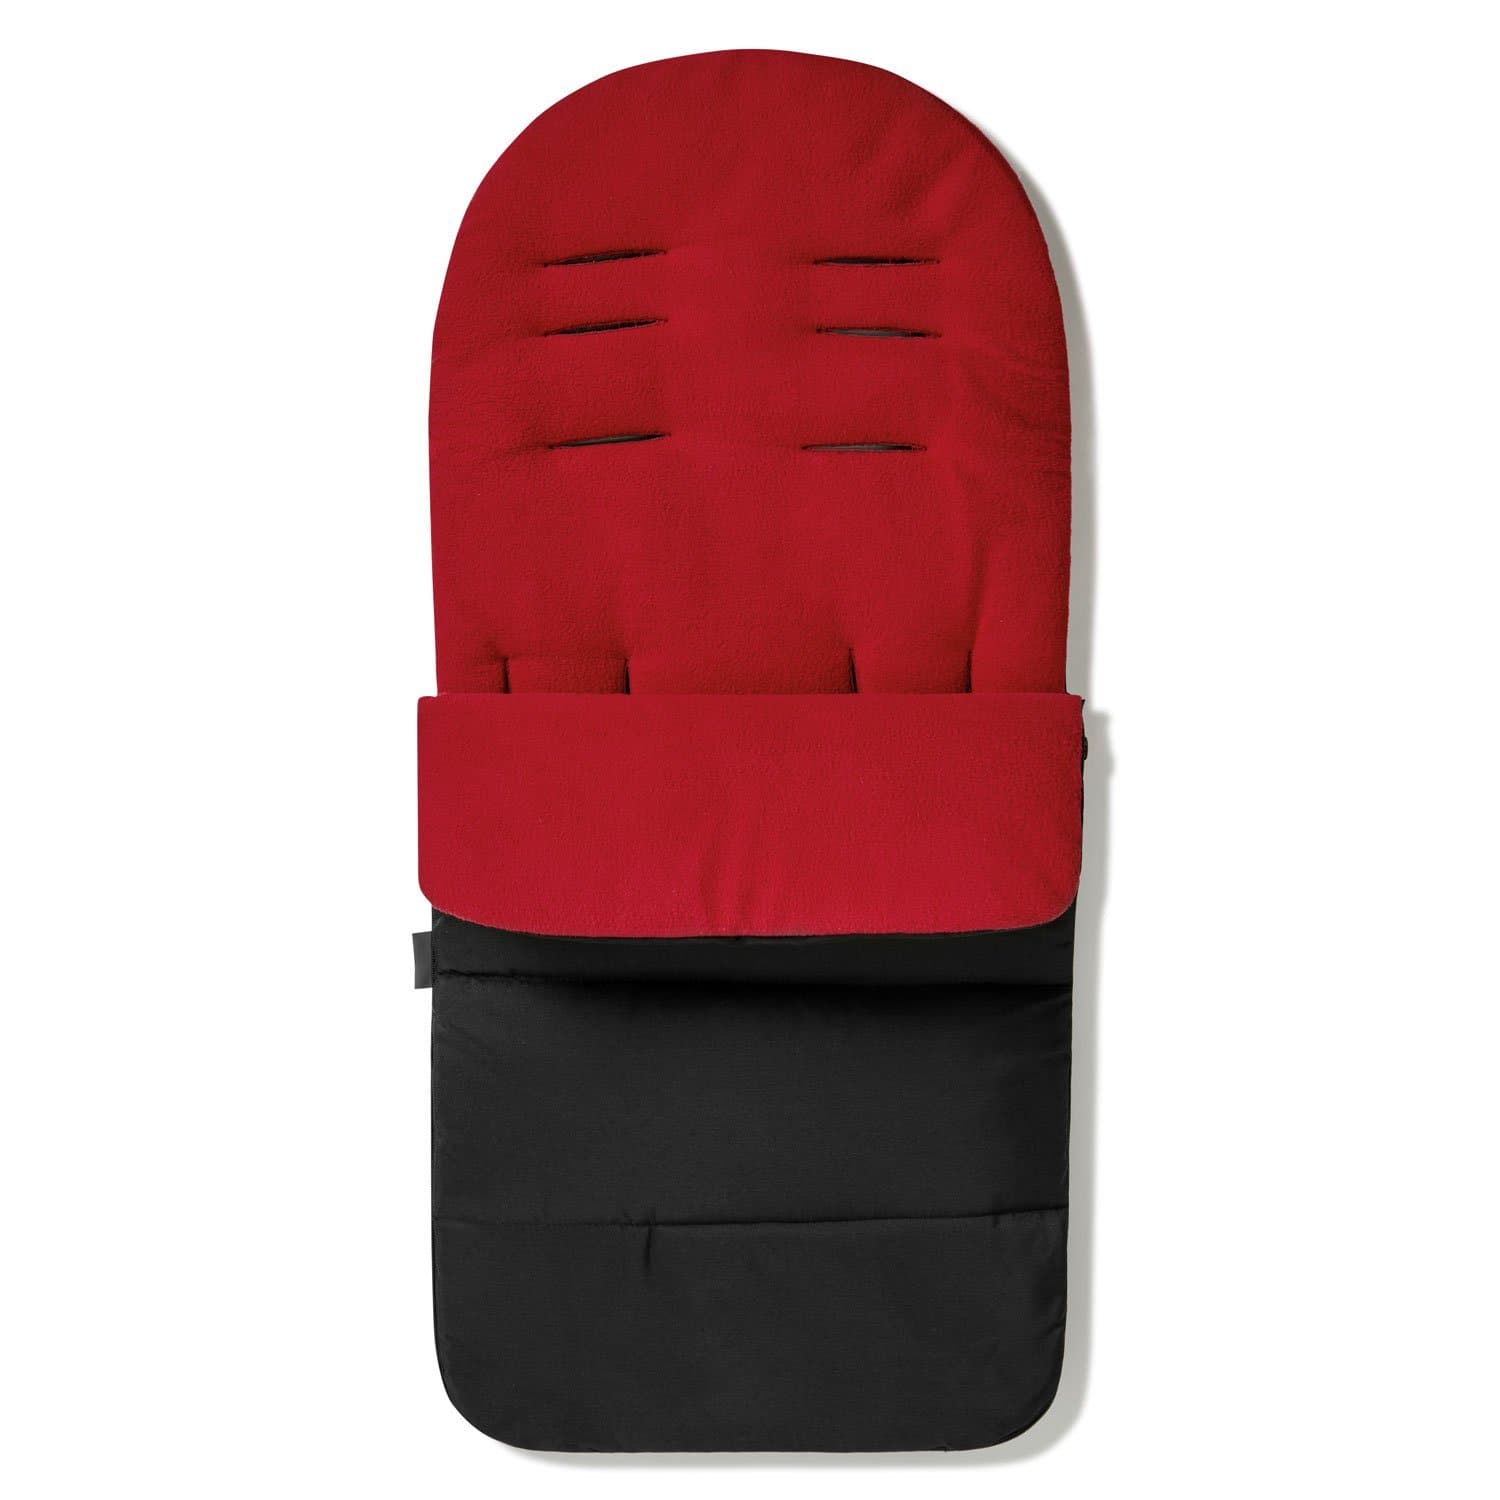 Premium Footmuff / Cosy Toes Compatible with Inglesina - Fire Red / Fits All Models | For Your Little One